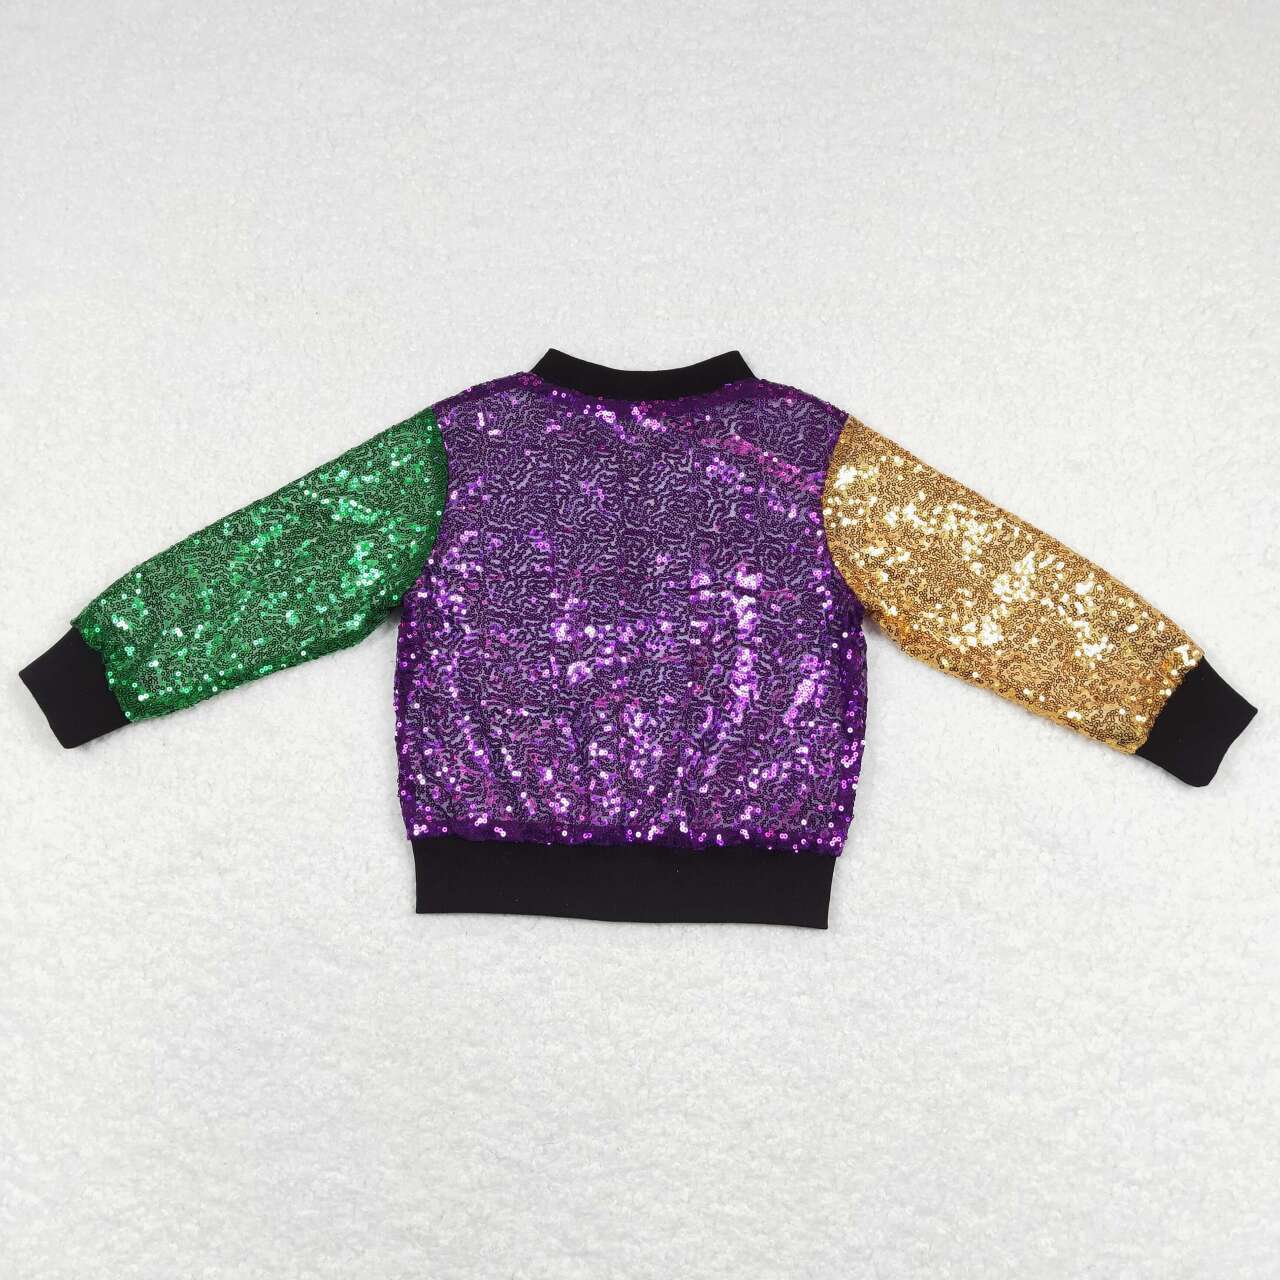 BT0451 Carnival purple, yellow and green sequined zipper jacket